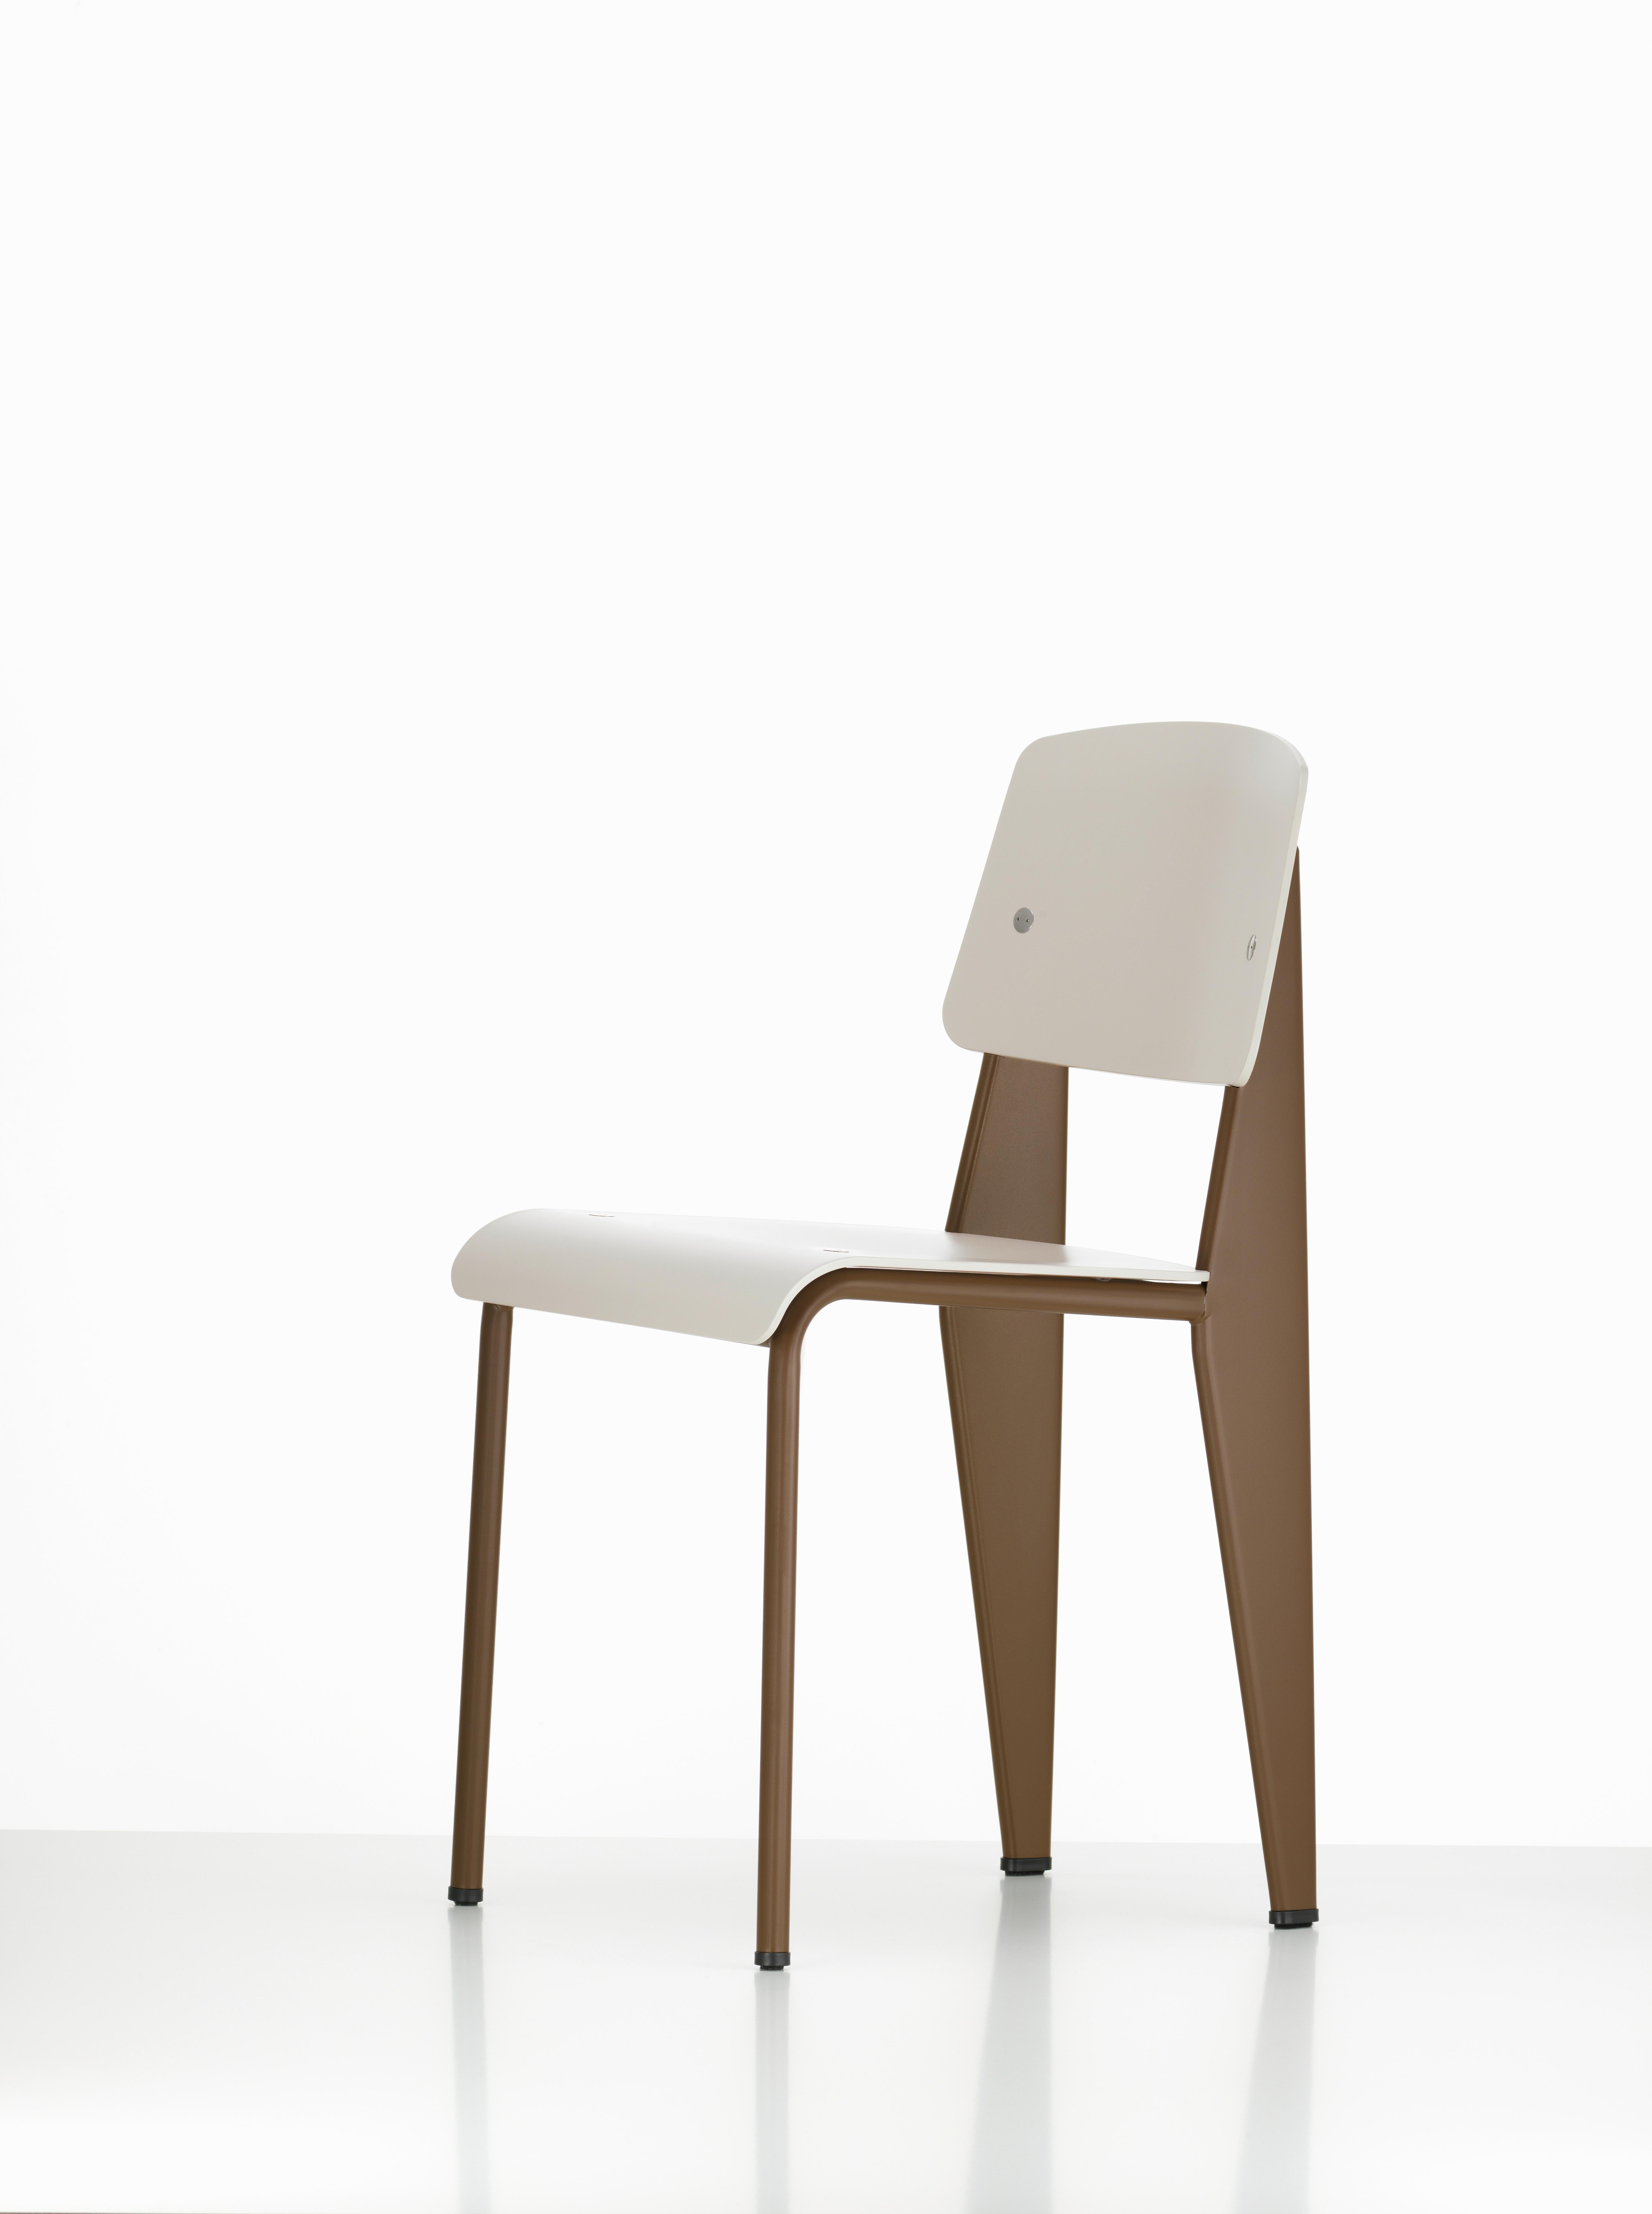 Steel Jean Prouvé Standard Chair SP in Teak Brown and Red for Vitra